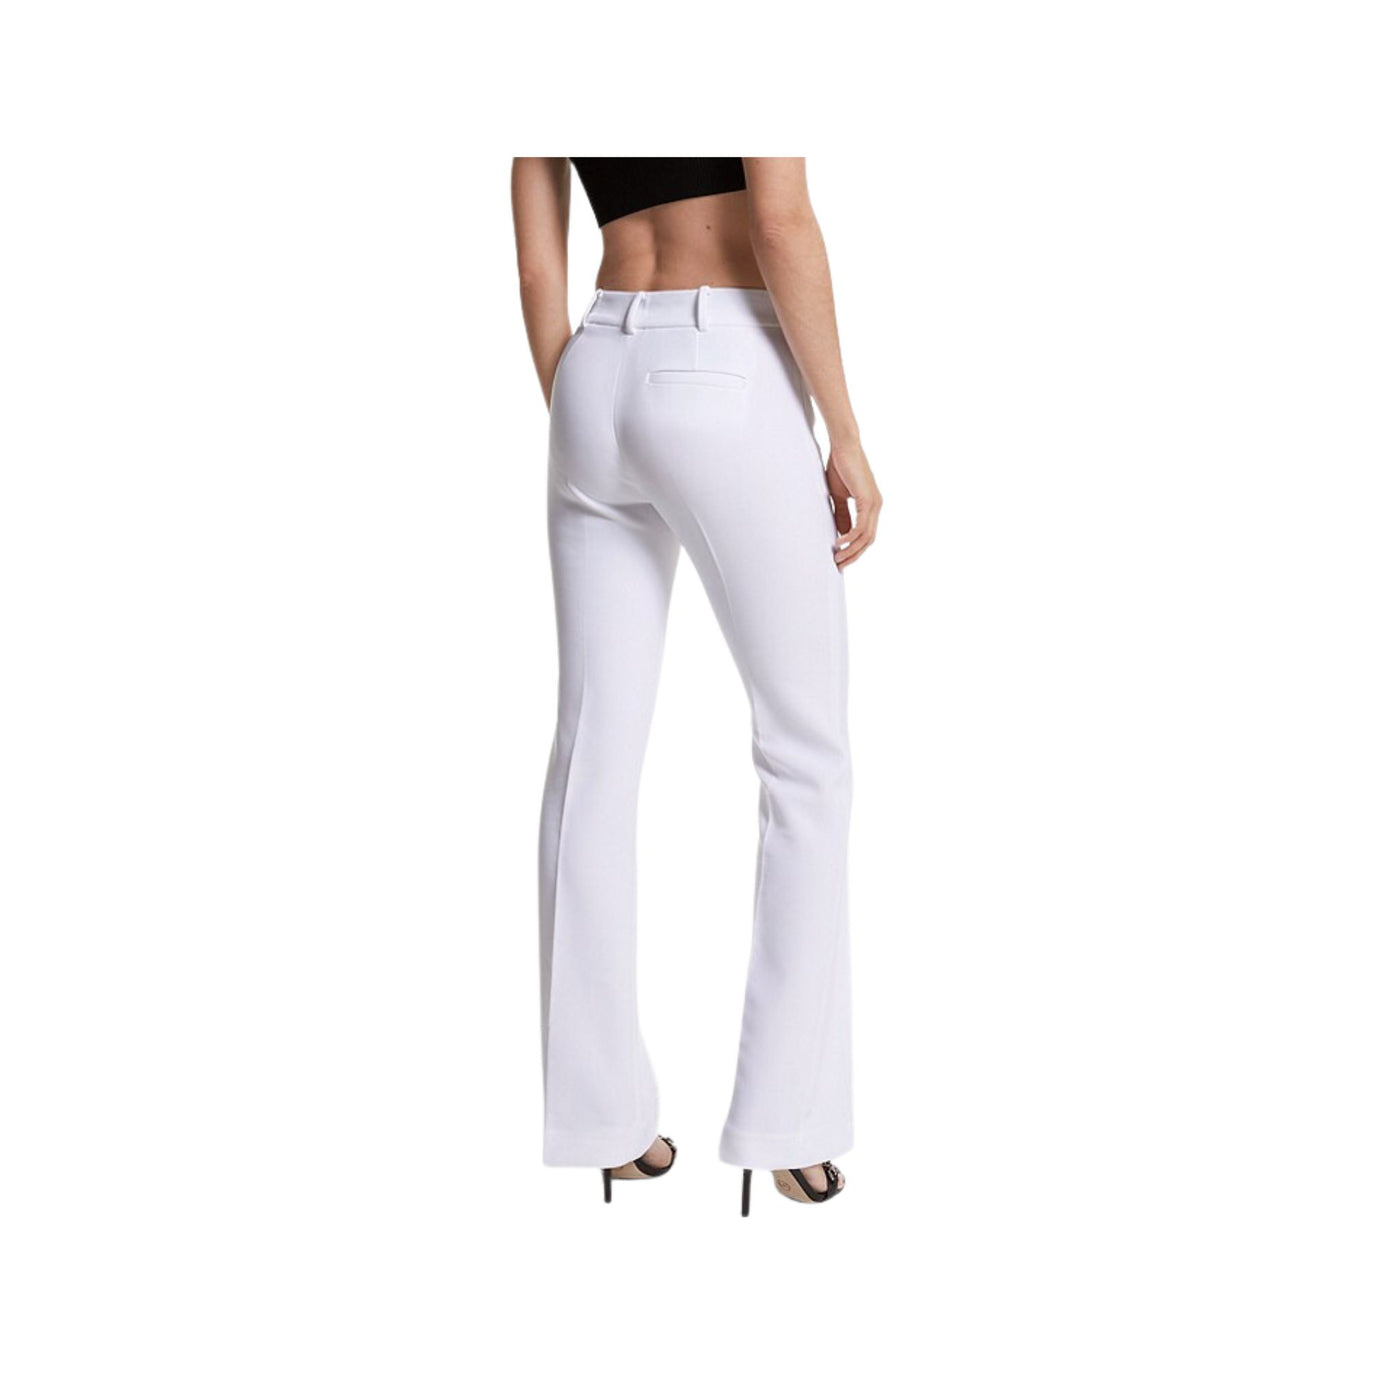 Women's trousers with flared bottom